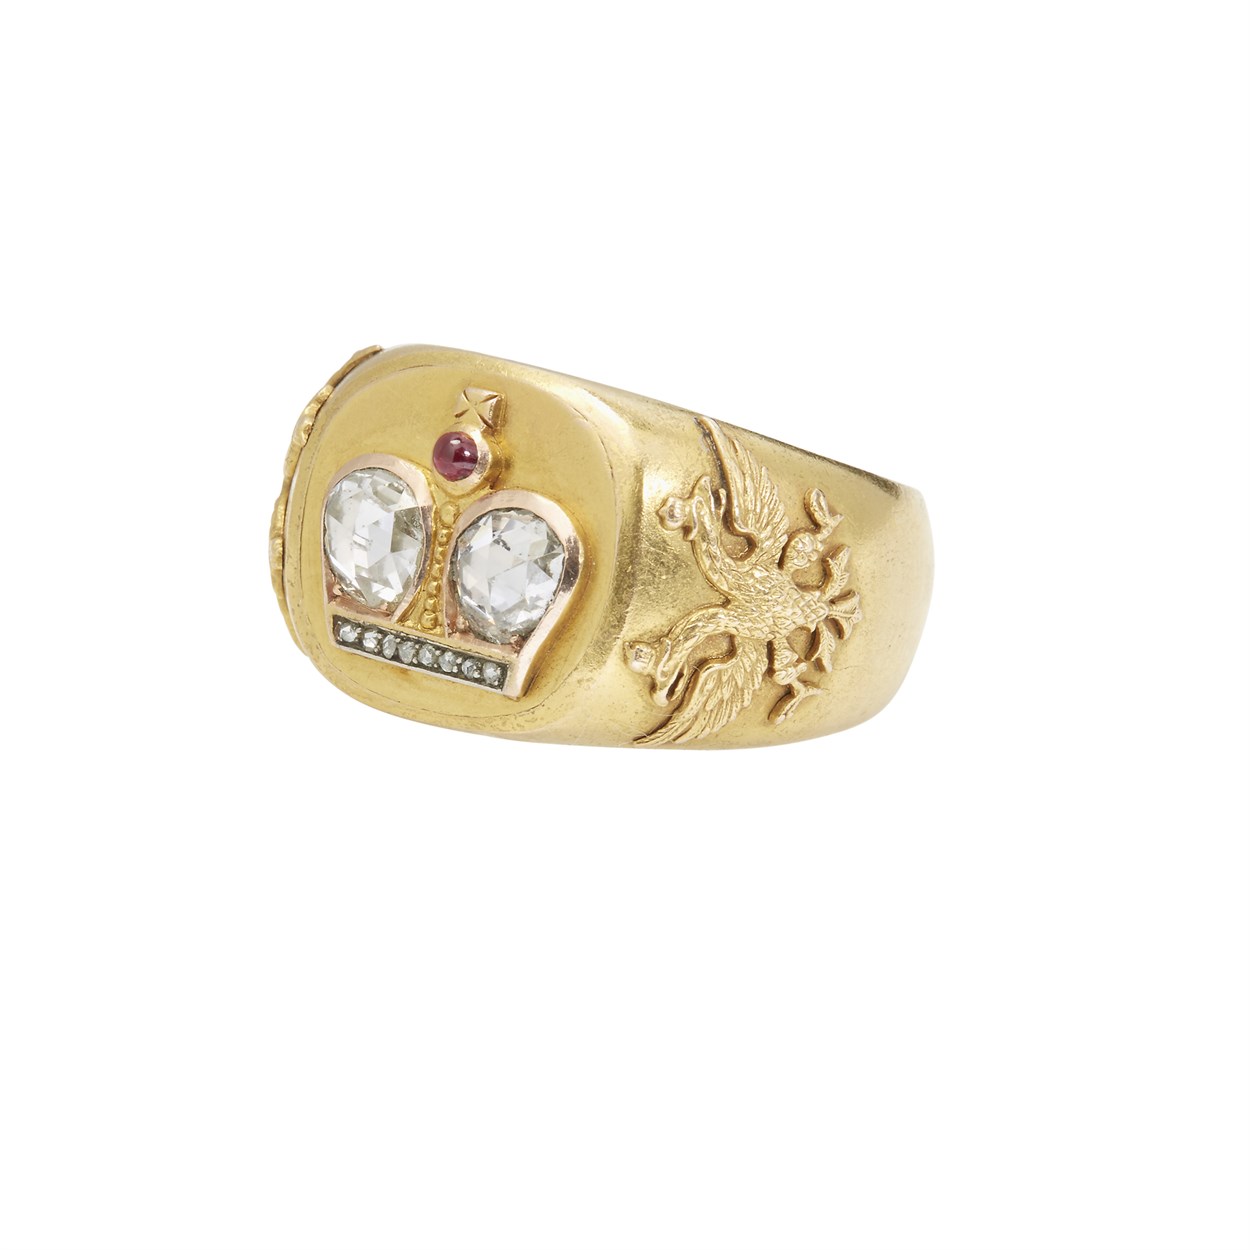 Lot 20 - A Russian Imperial diamond-set gold presentation ring